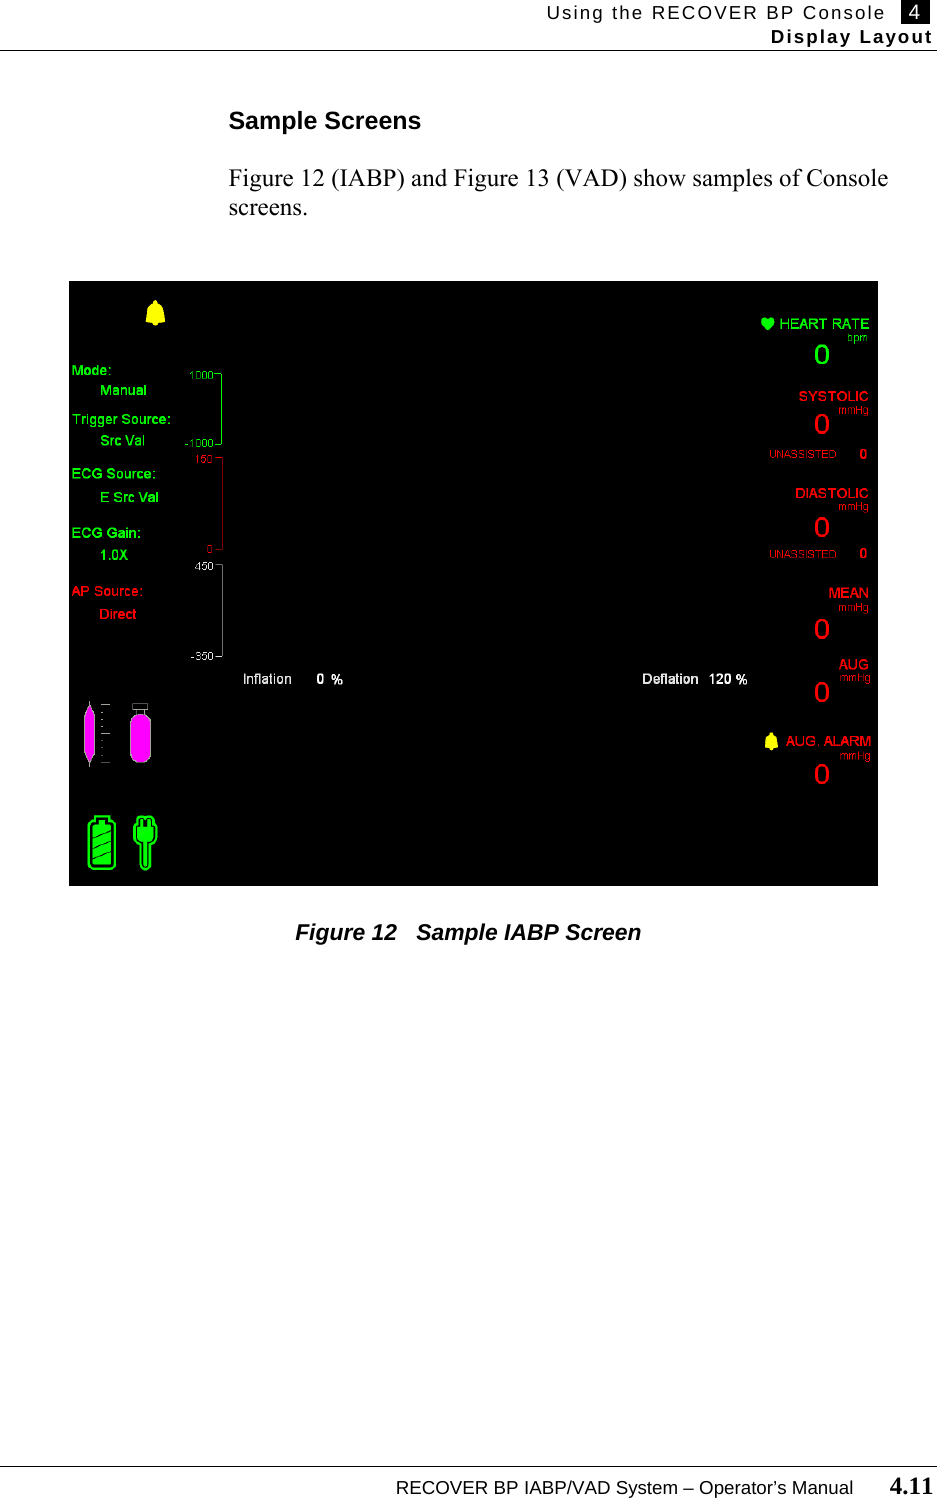 Using the RECOVER BP Console   4   Display Layout  RECOVER BP IABP/VAD System – Operator’s Manual       4.11  Sample Screens  Figure 12 (IABP) and Figure 13 (VAD) show samples of Console screens.                                       Figure 12   Sample IABP Screen 